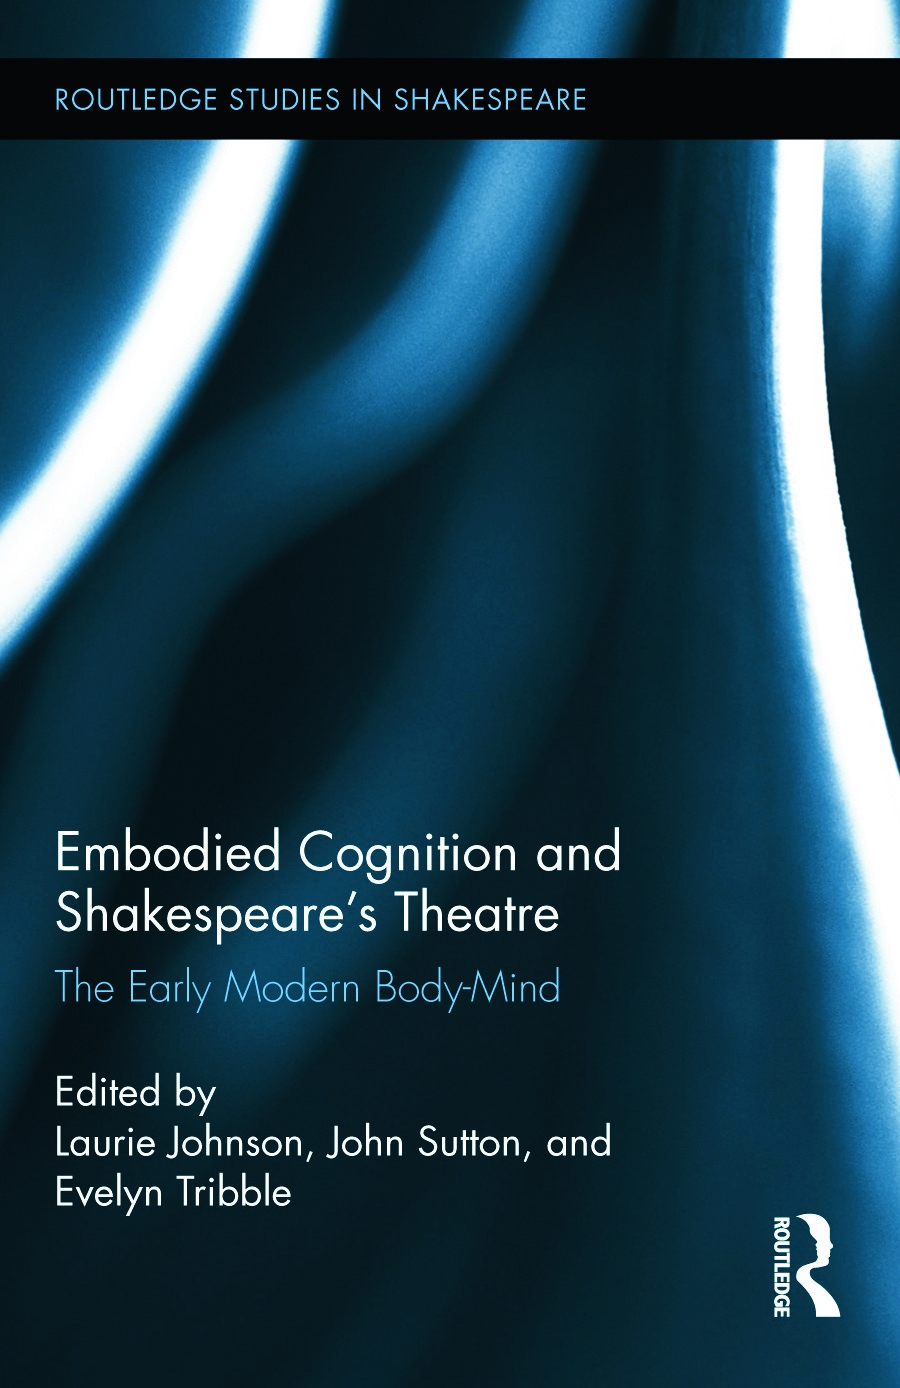 Embodied Cognition and Shakespeare’s Theatre: The Early Modern Body-Mind